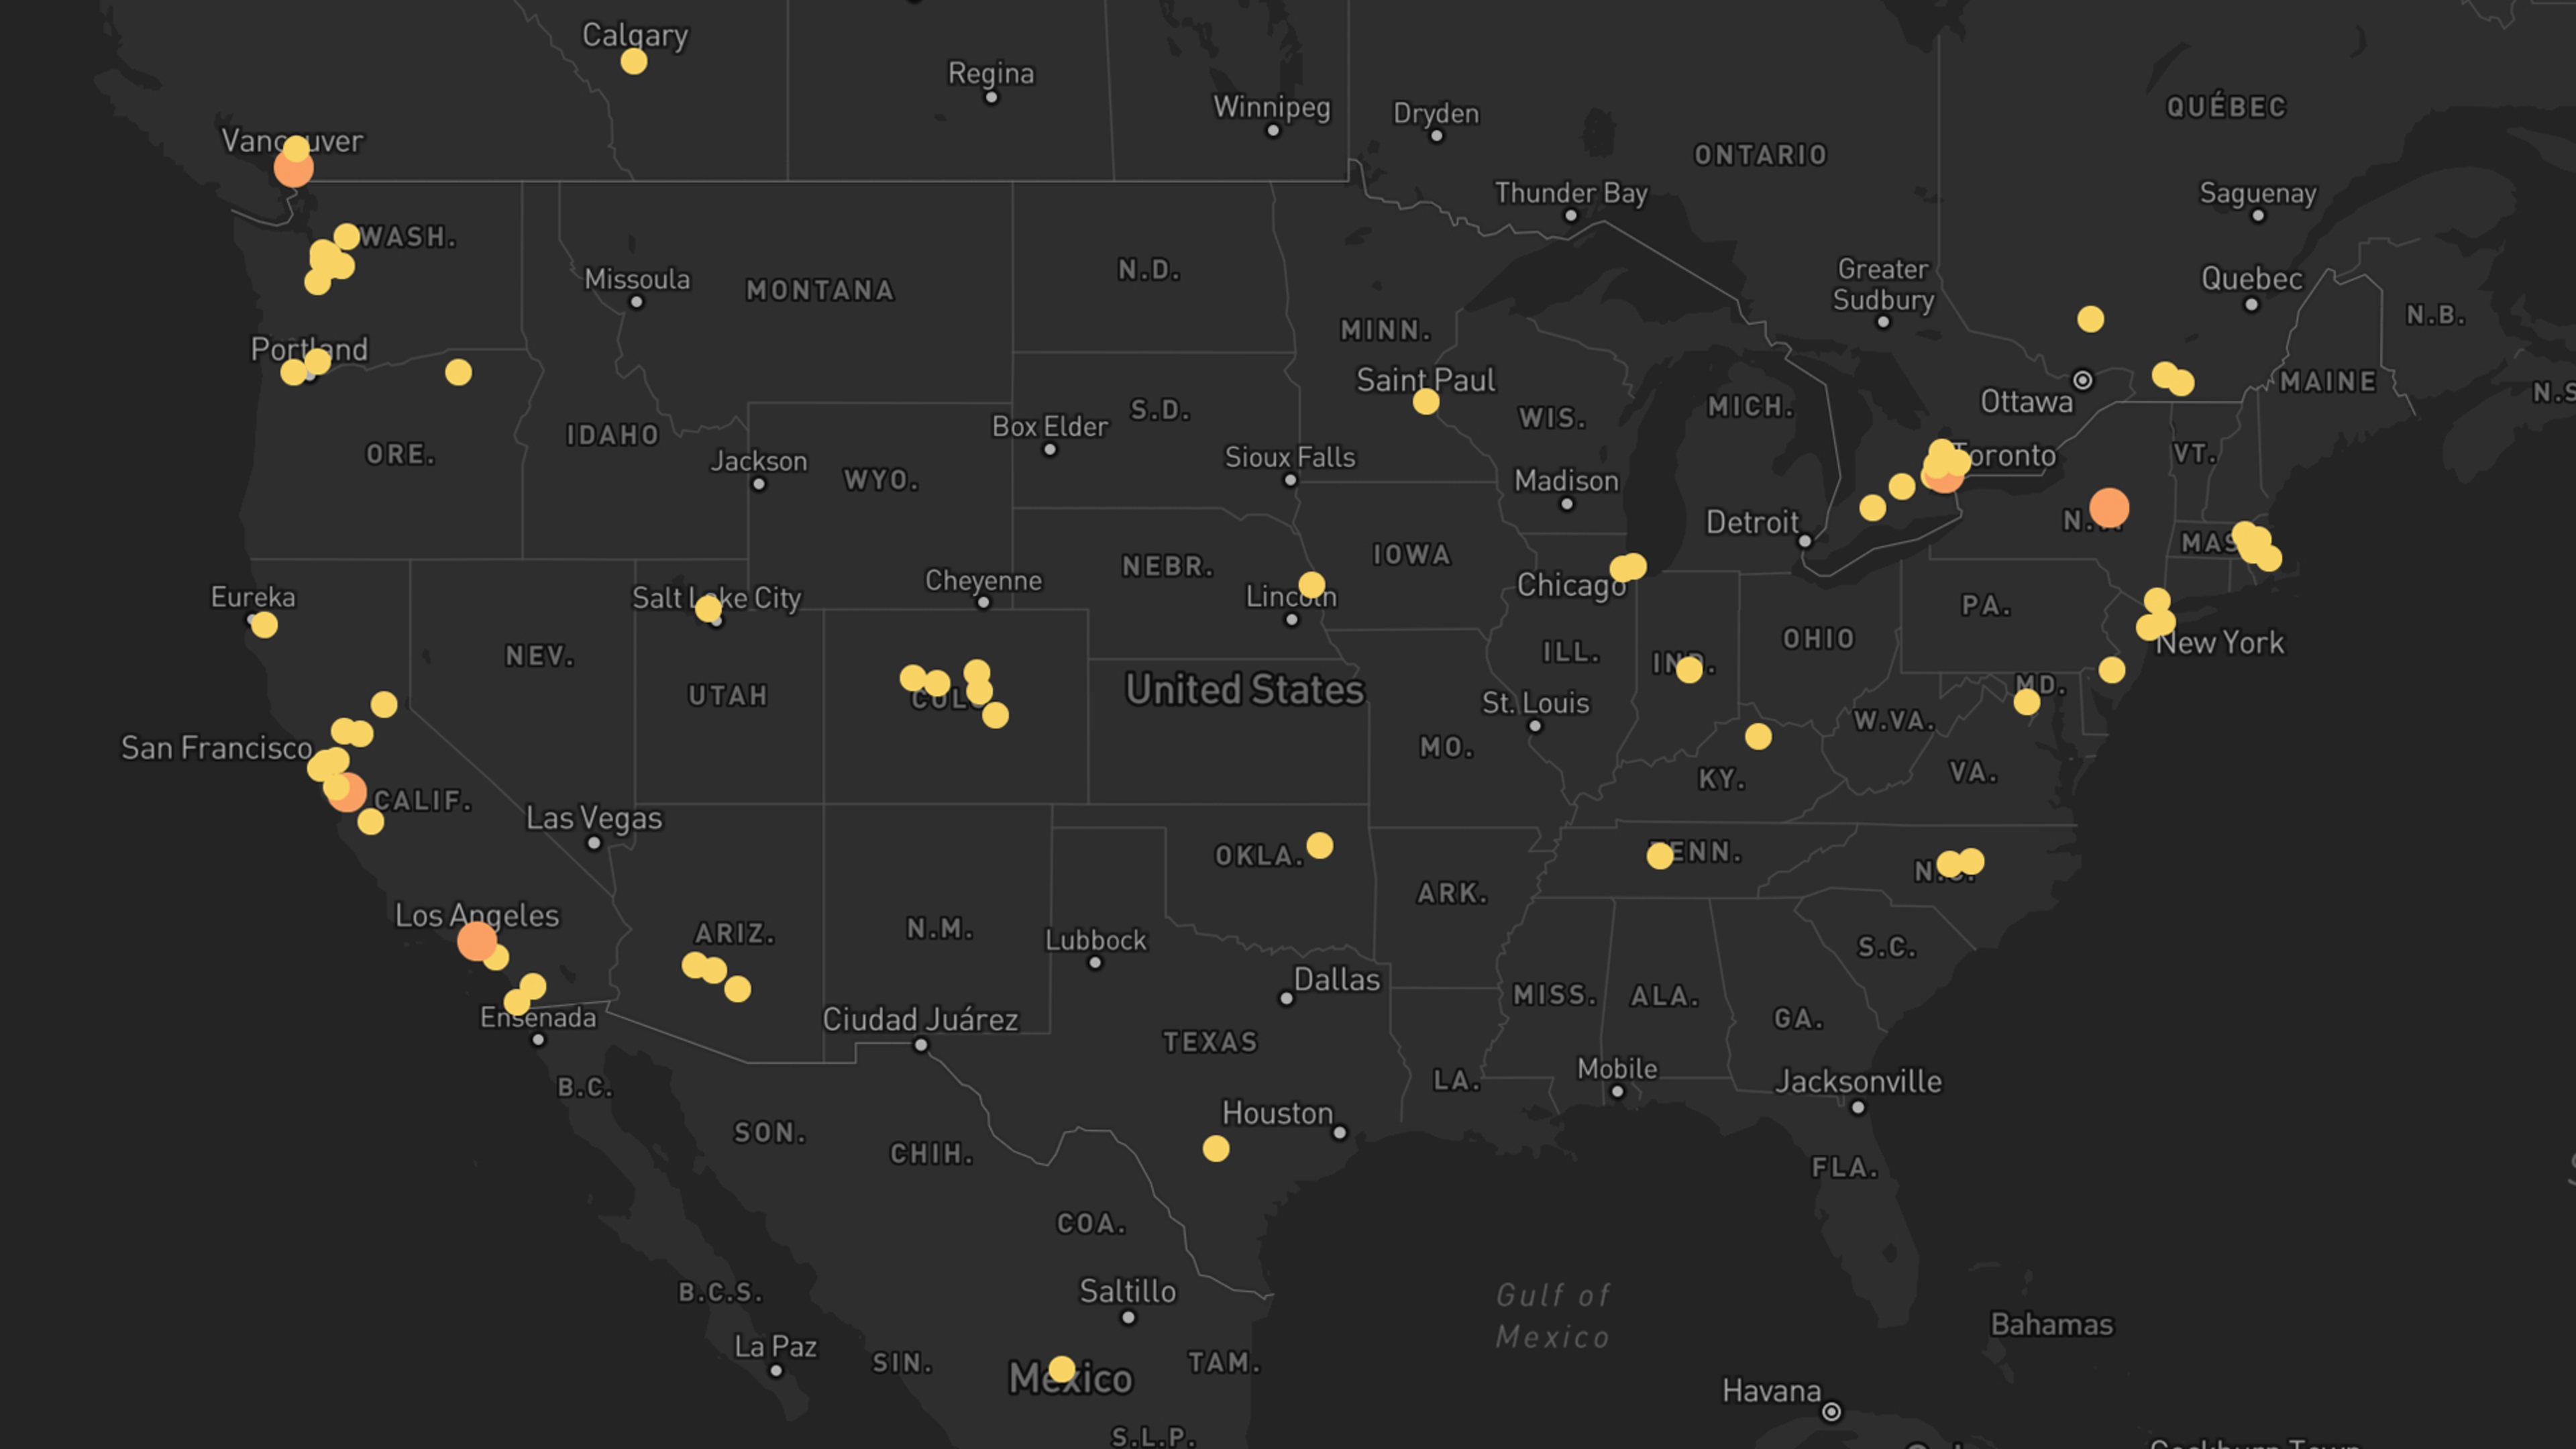 Watch how quickly COVID-19 is spreading around the U.S. and world with these 3 animated maps